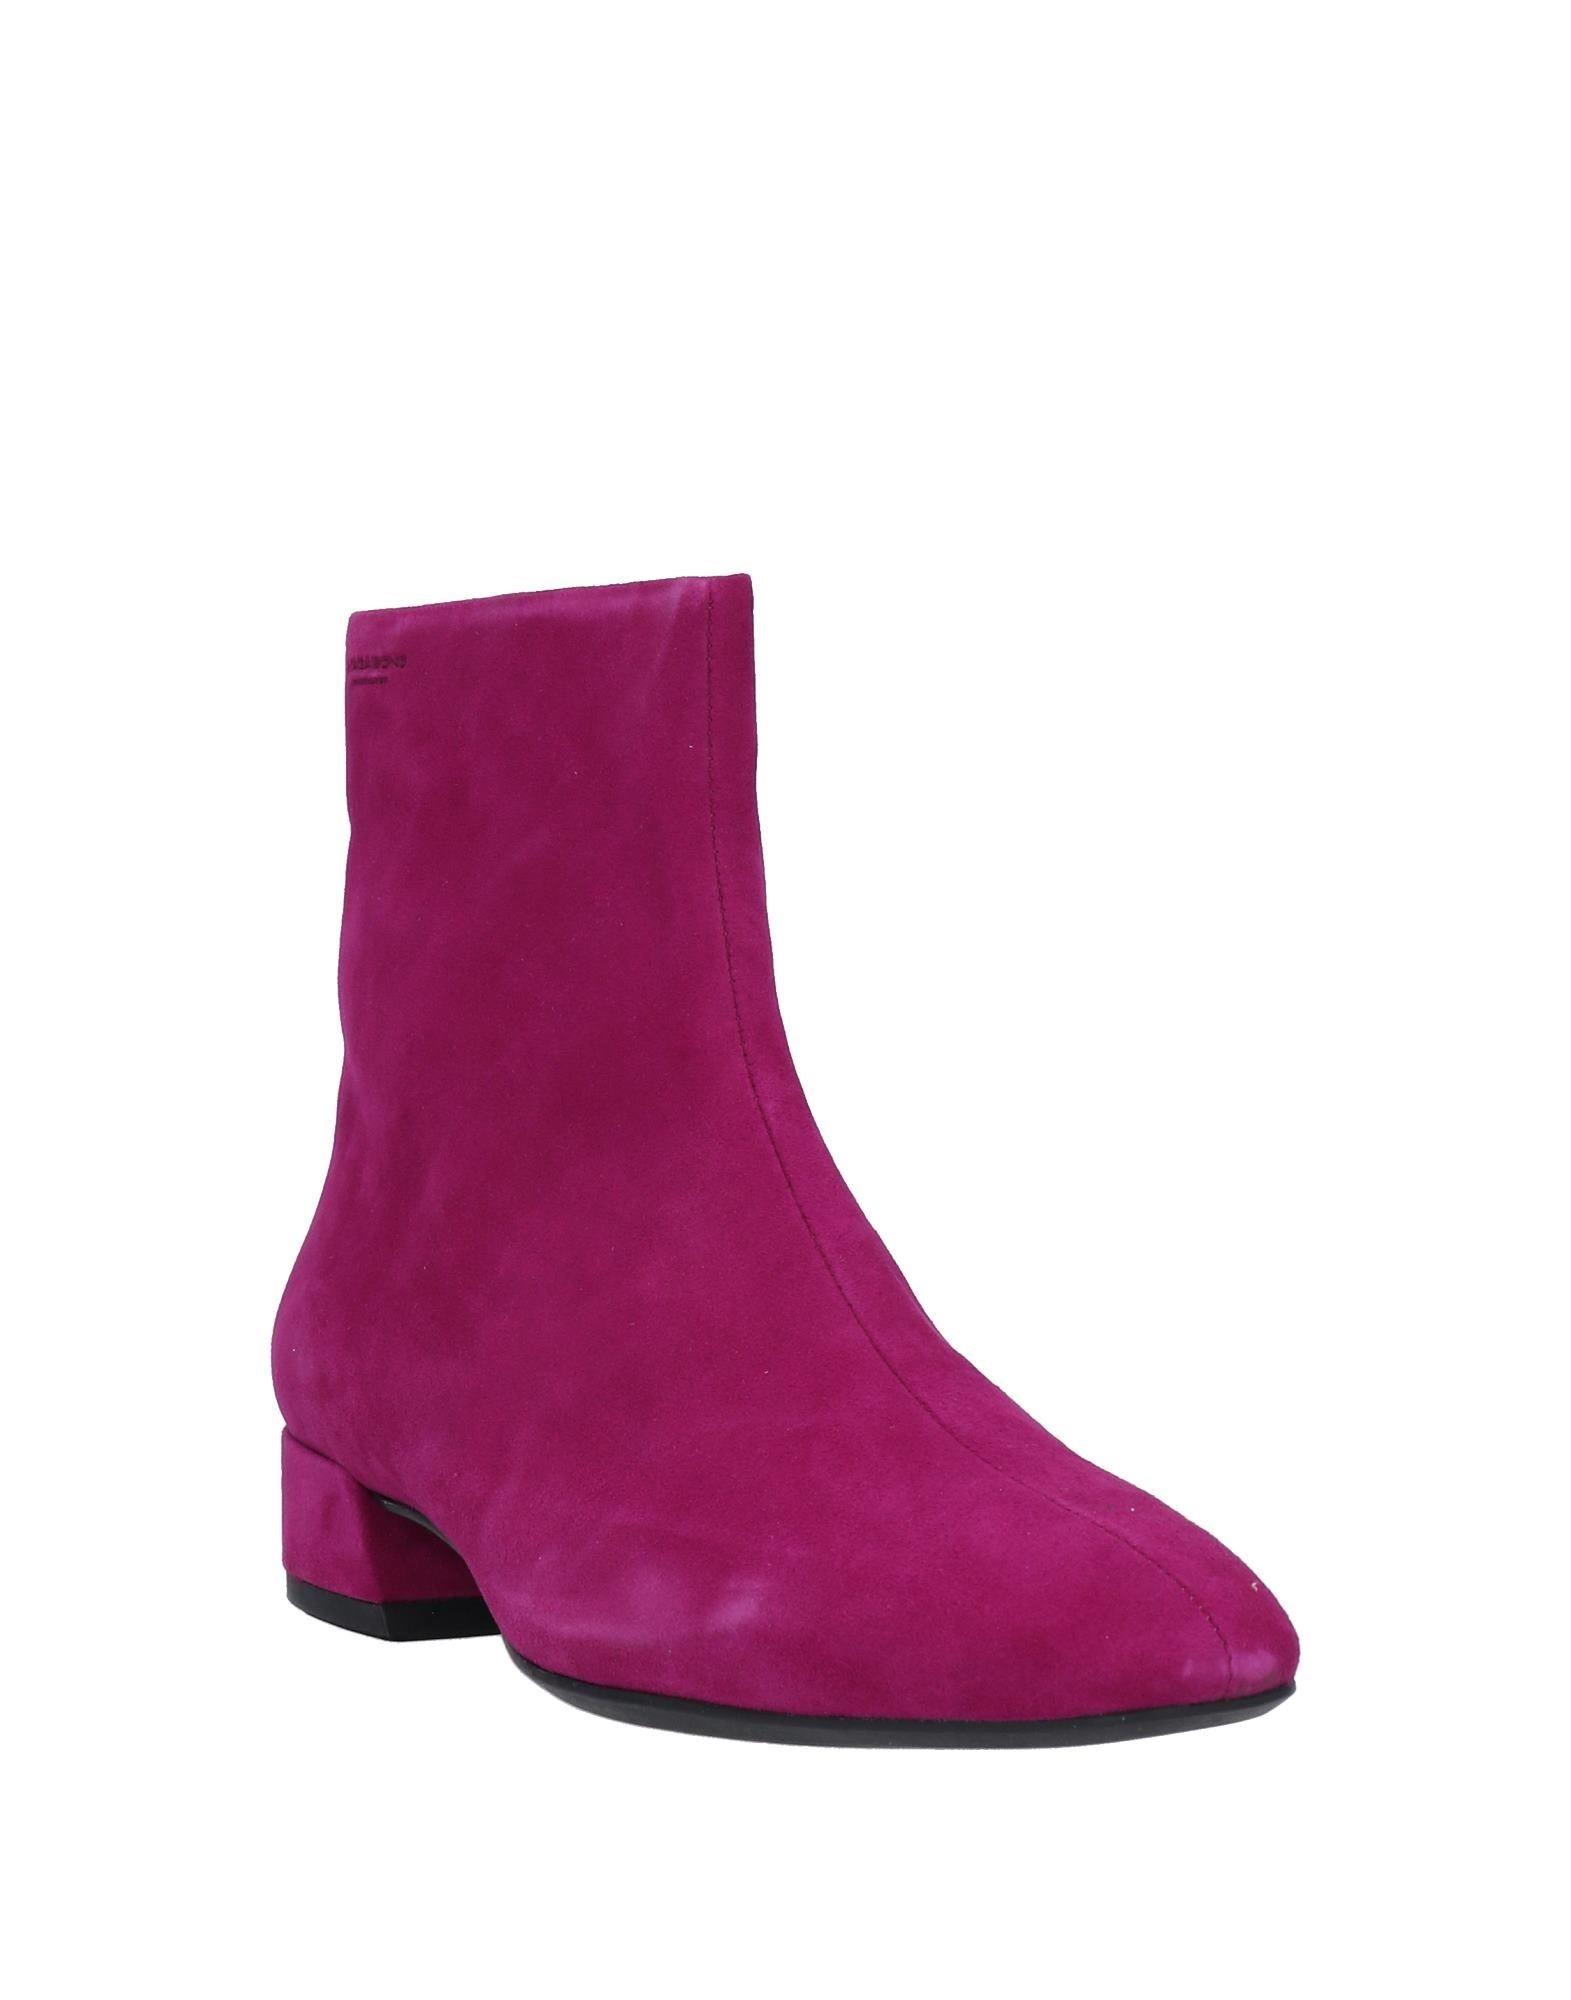 Vagabond Suede Ankle Boots in Fuchsia (Purple) - Lyst